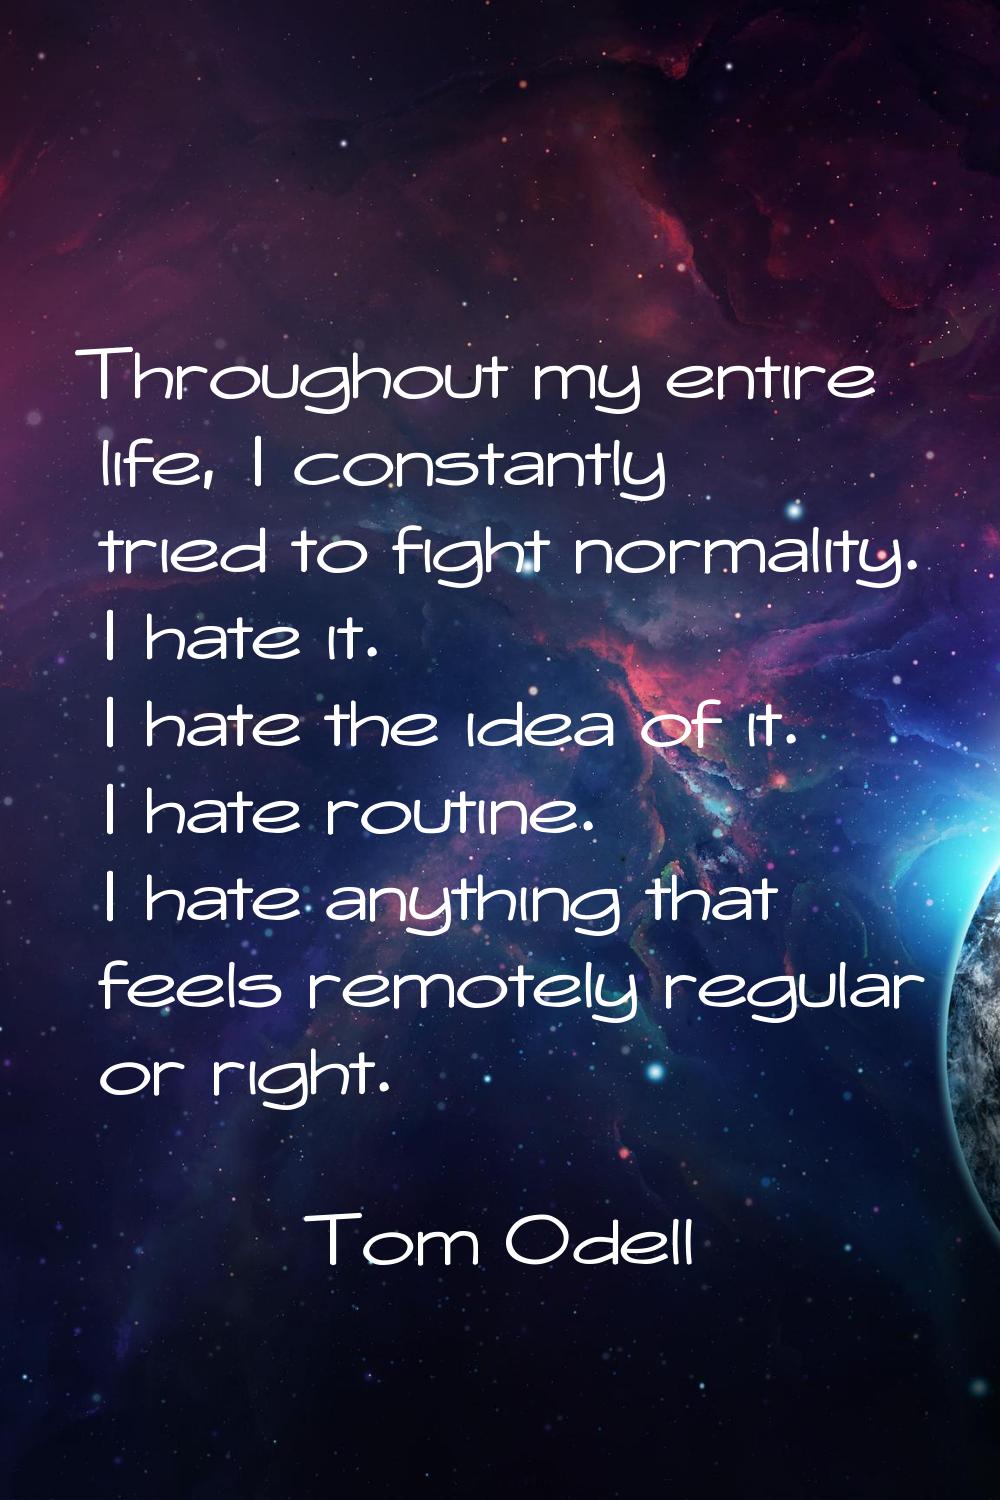 Throughout my entire life, I constantly tried to fight normality. I hate it. I hate the idea of it.